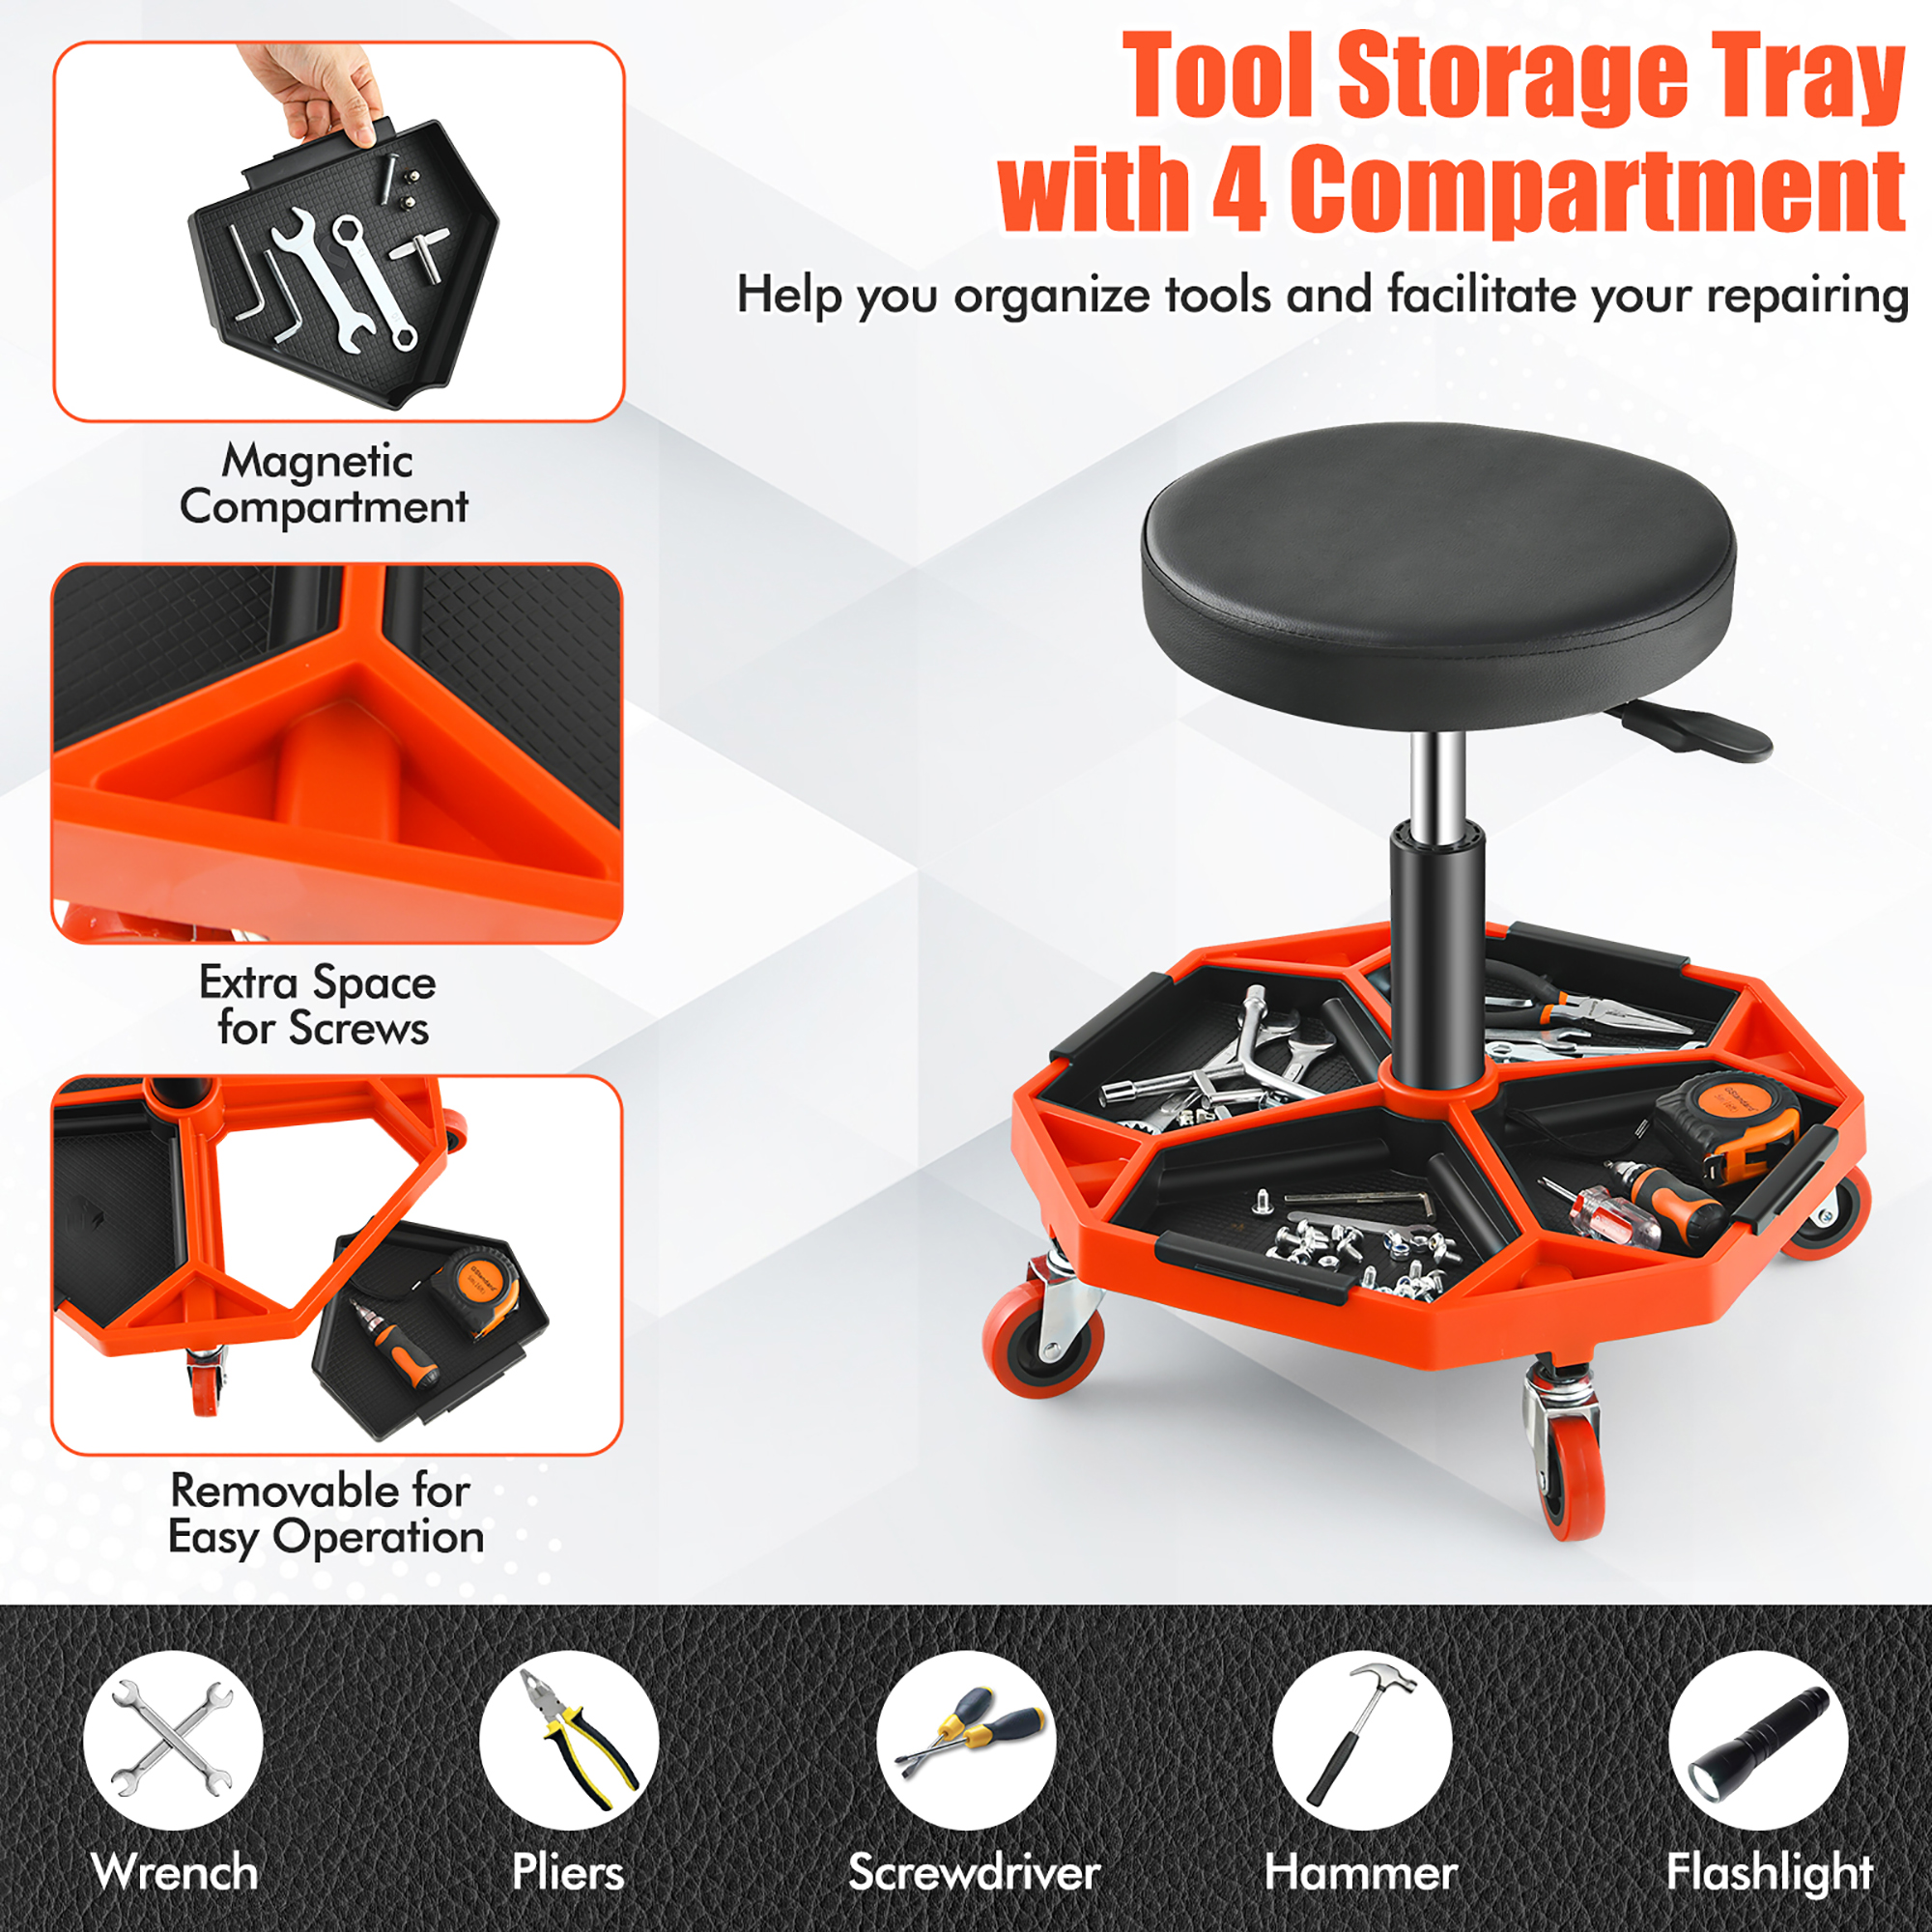 Costway Heavy-Duty Adjustable Height Rolling Stool withTool Tray Storage 330 LBS Capacity